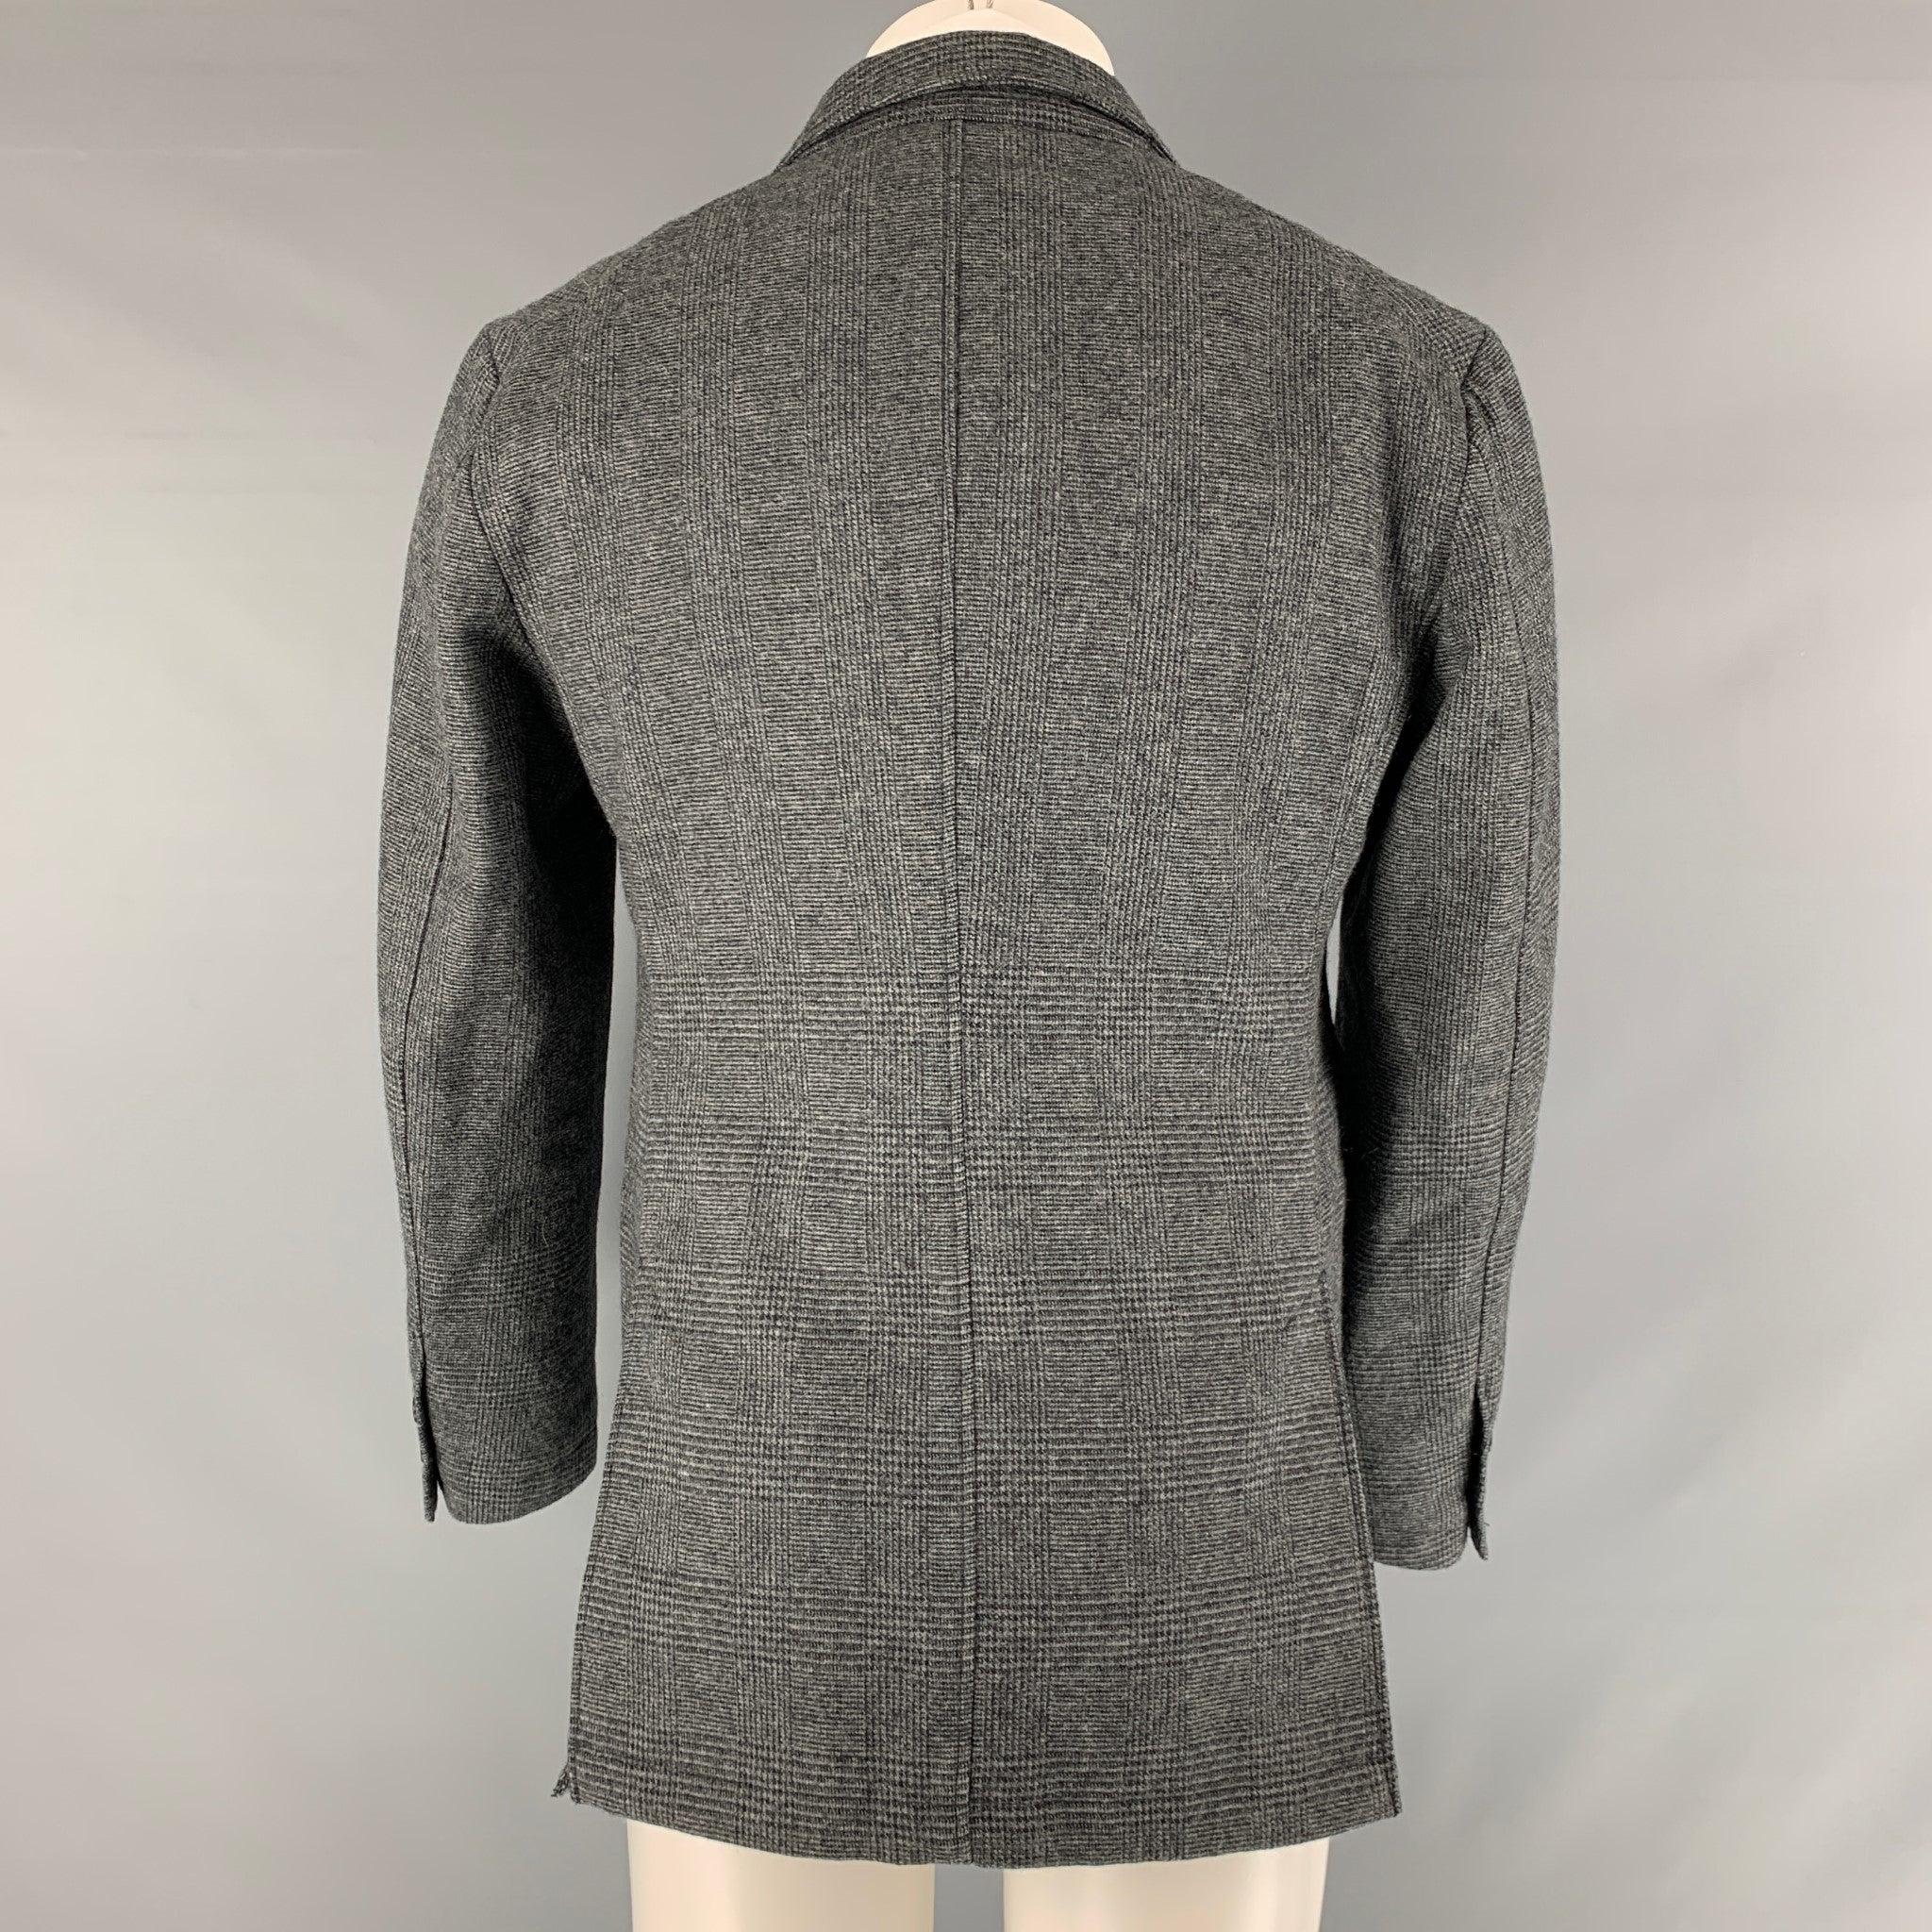 ENGINEERED GARMENTS Size S Grey Black Glenplaid Wool Sport Coat In Good Condition For Sale In San Francisco, CA